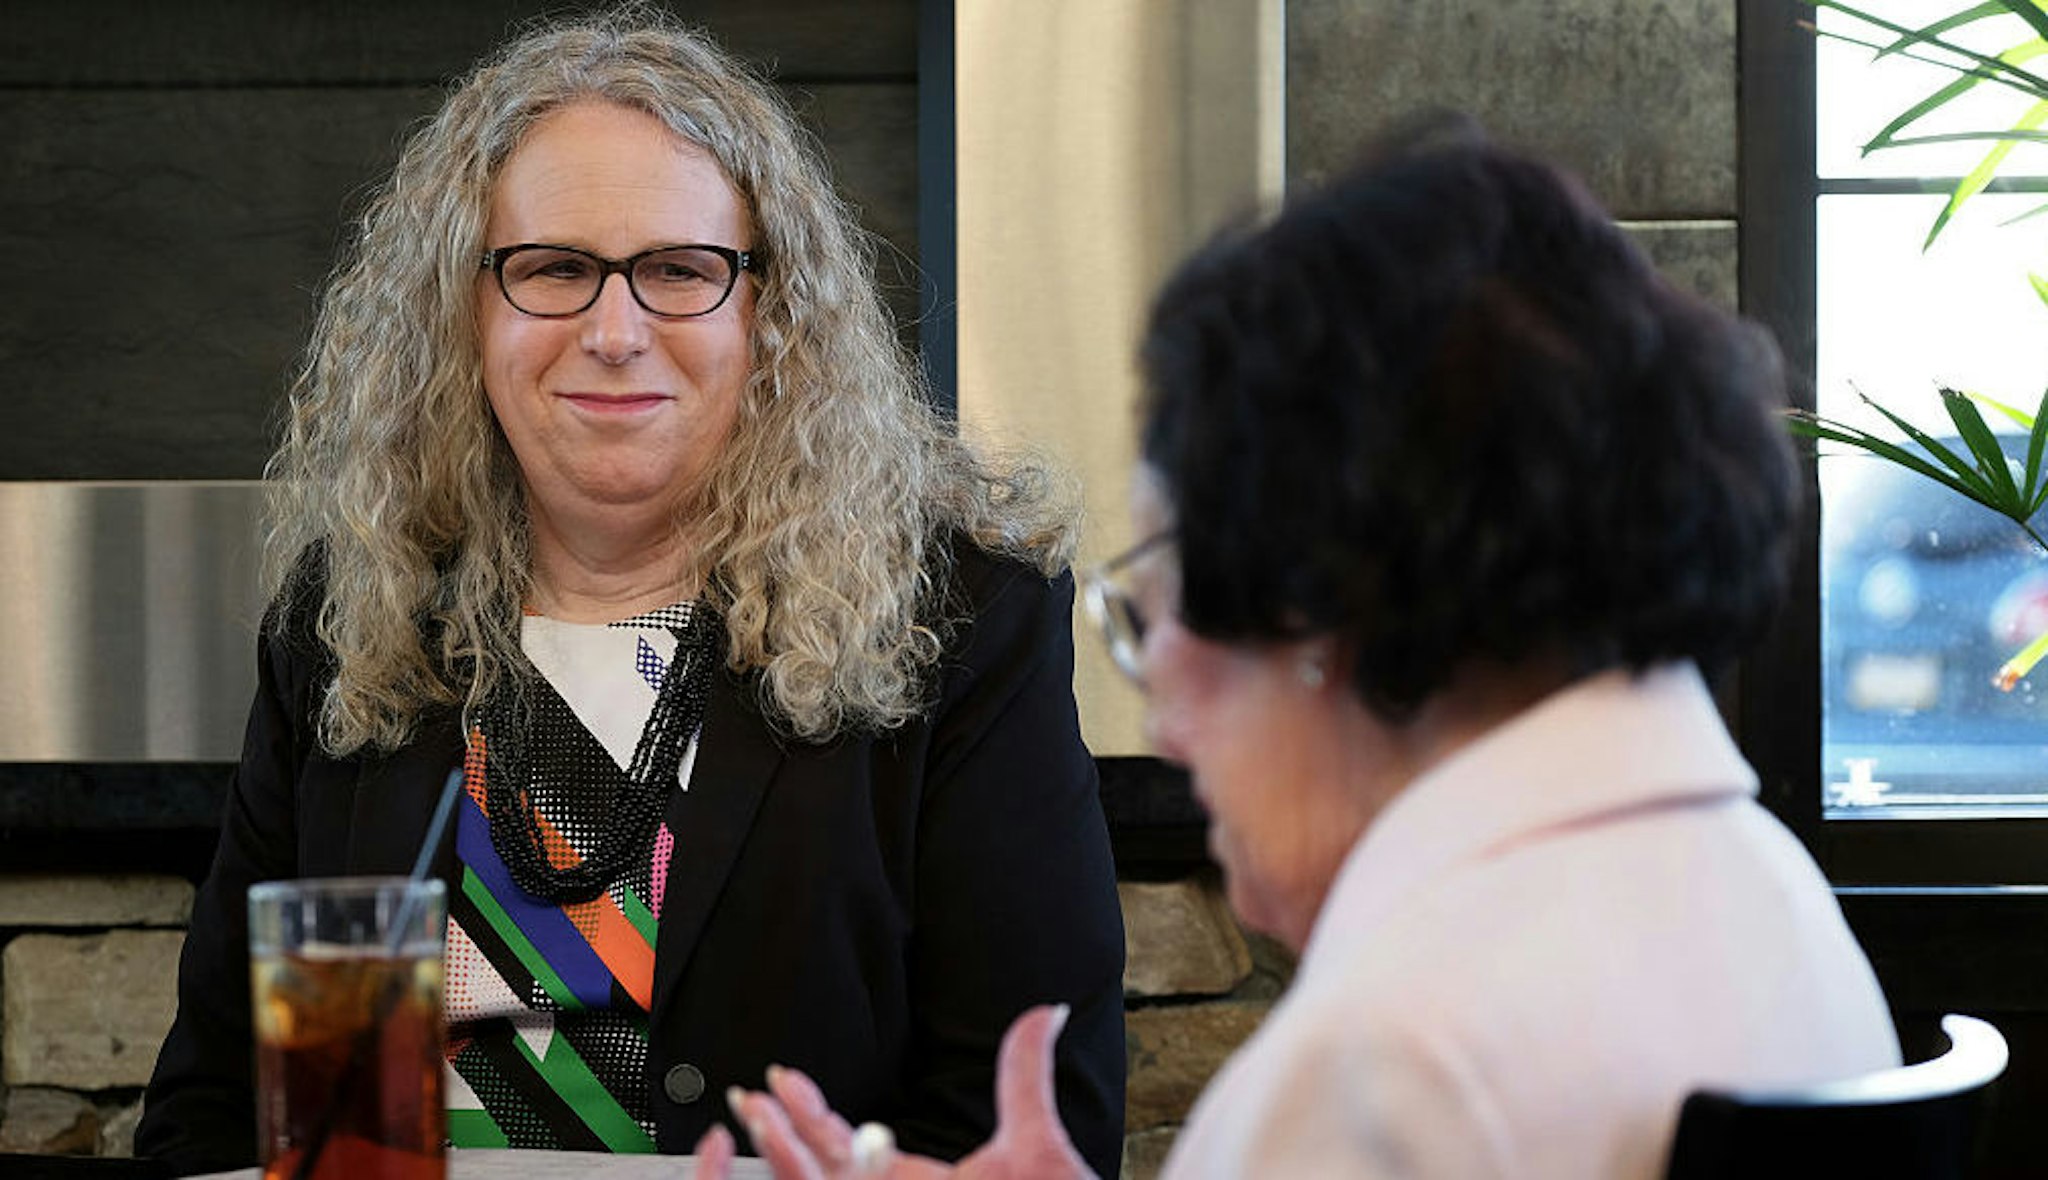 Rachel Levine, MD, physician general for the state of Pennsylvania, dines with her mother Lillian Levine, in Harrisburg, PA, on May 16, 2016. Levine is transgender and has a close relationship with her mother.